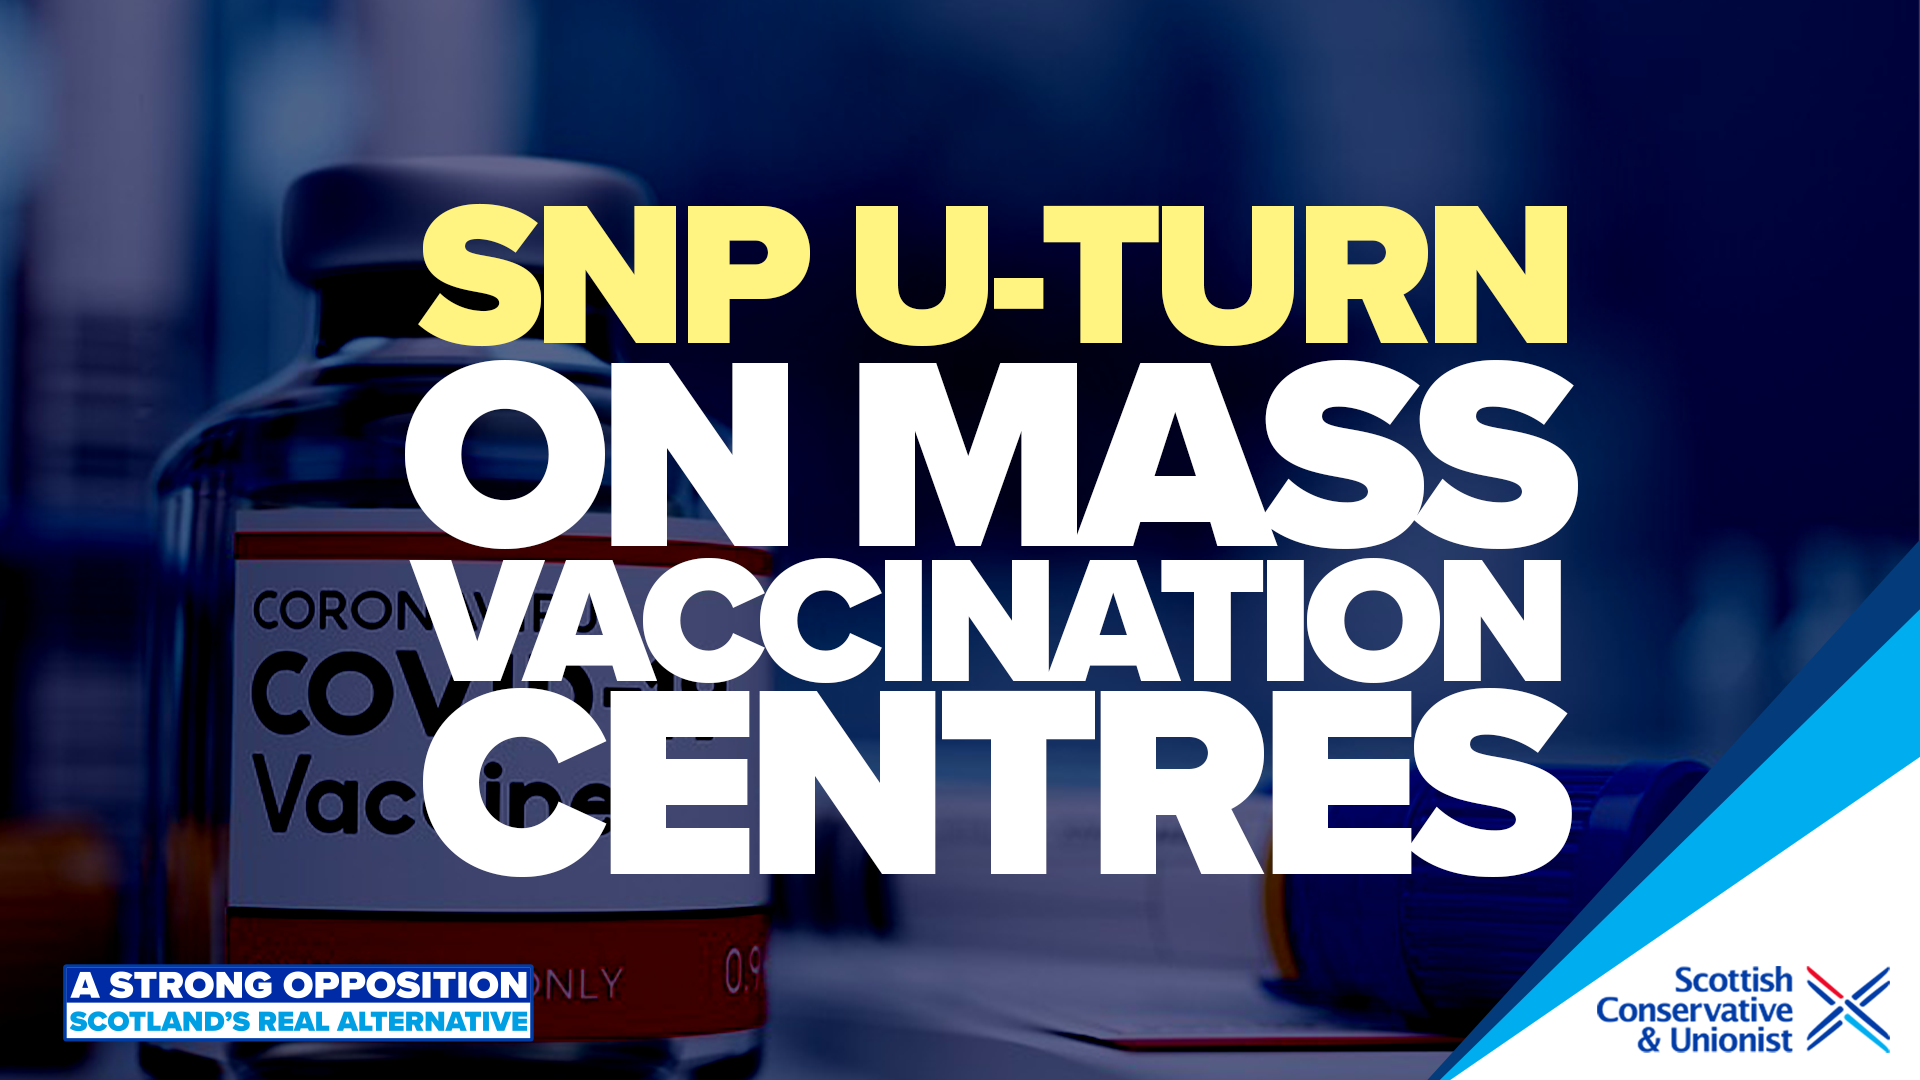 SNP agree to Scottish Conservative calls for mass vaccination centres